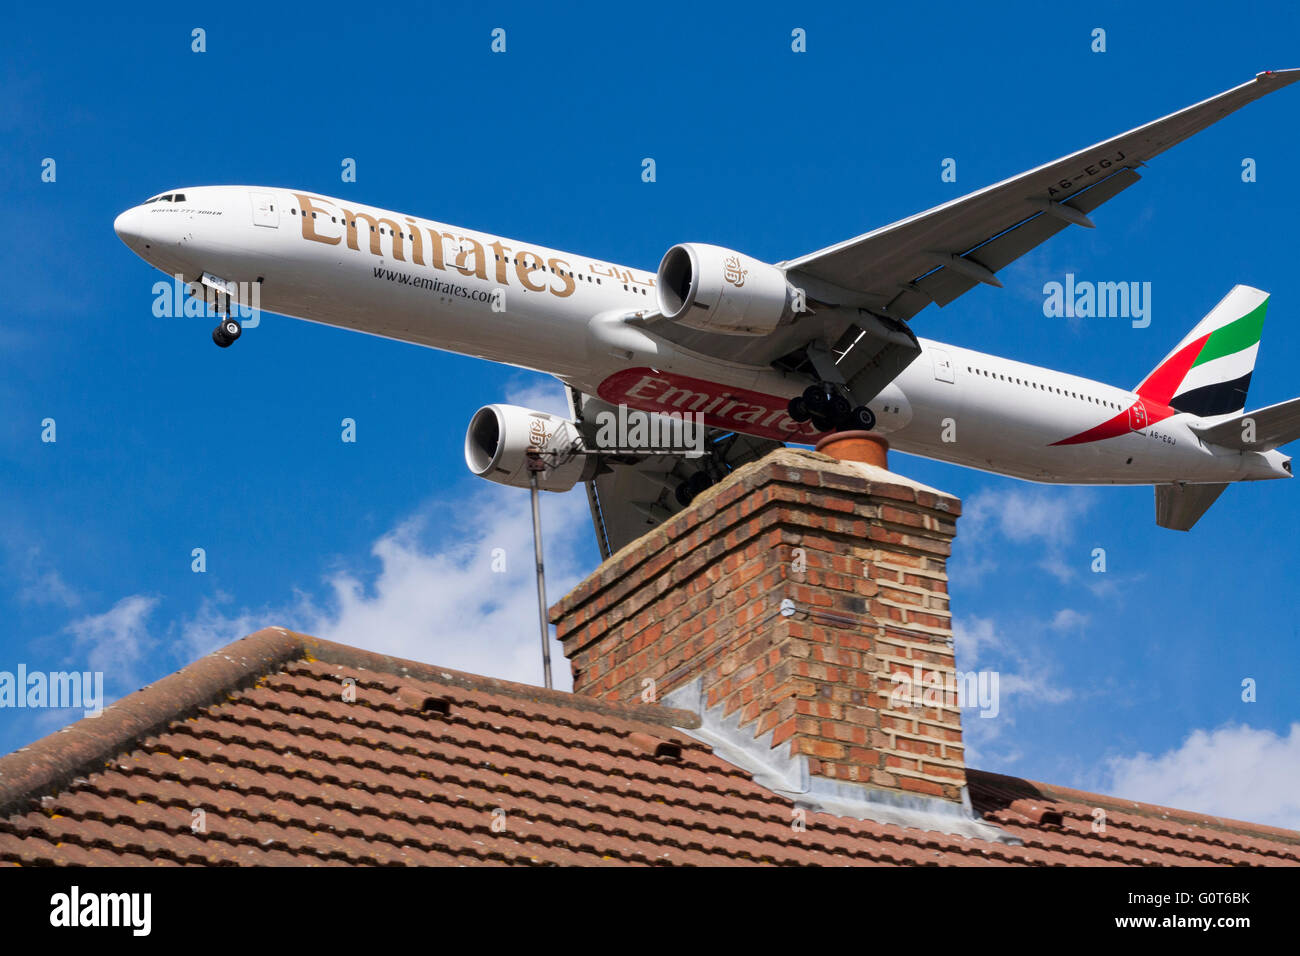 Emirates Boeing 777-31H(ER), registration / tail number A6-EGJ approaching Heathrow airport, London. UK. Stock Photo